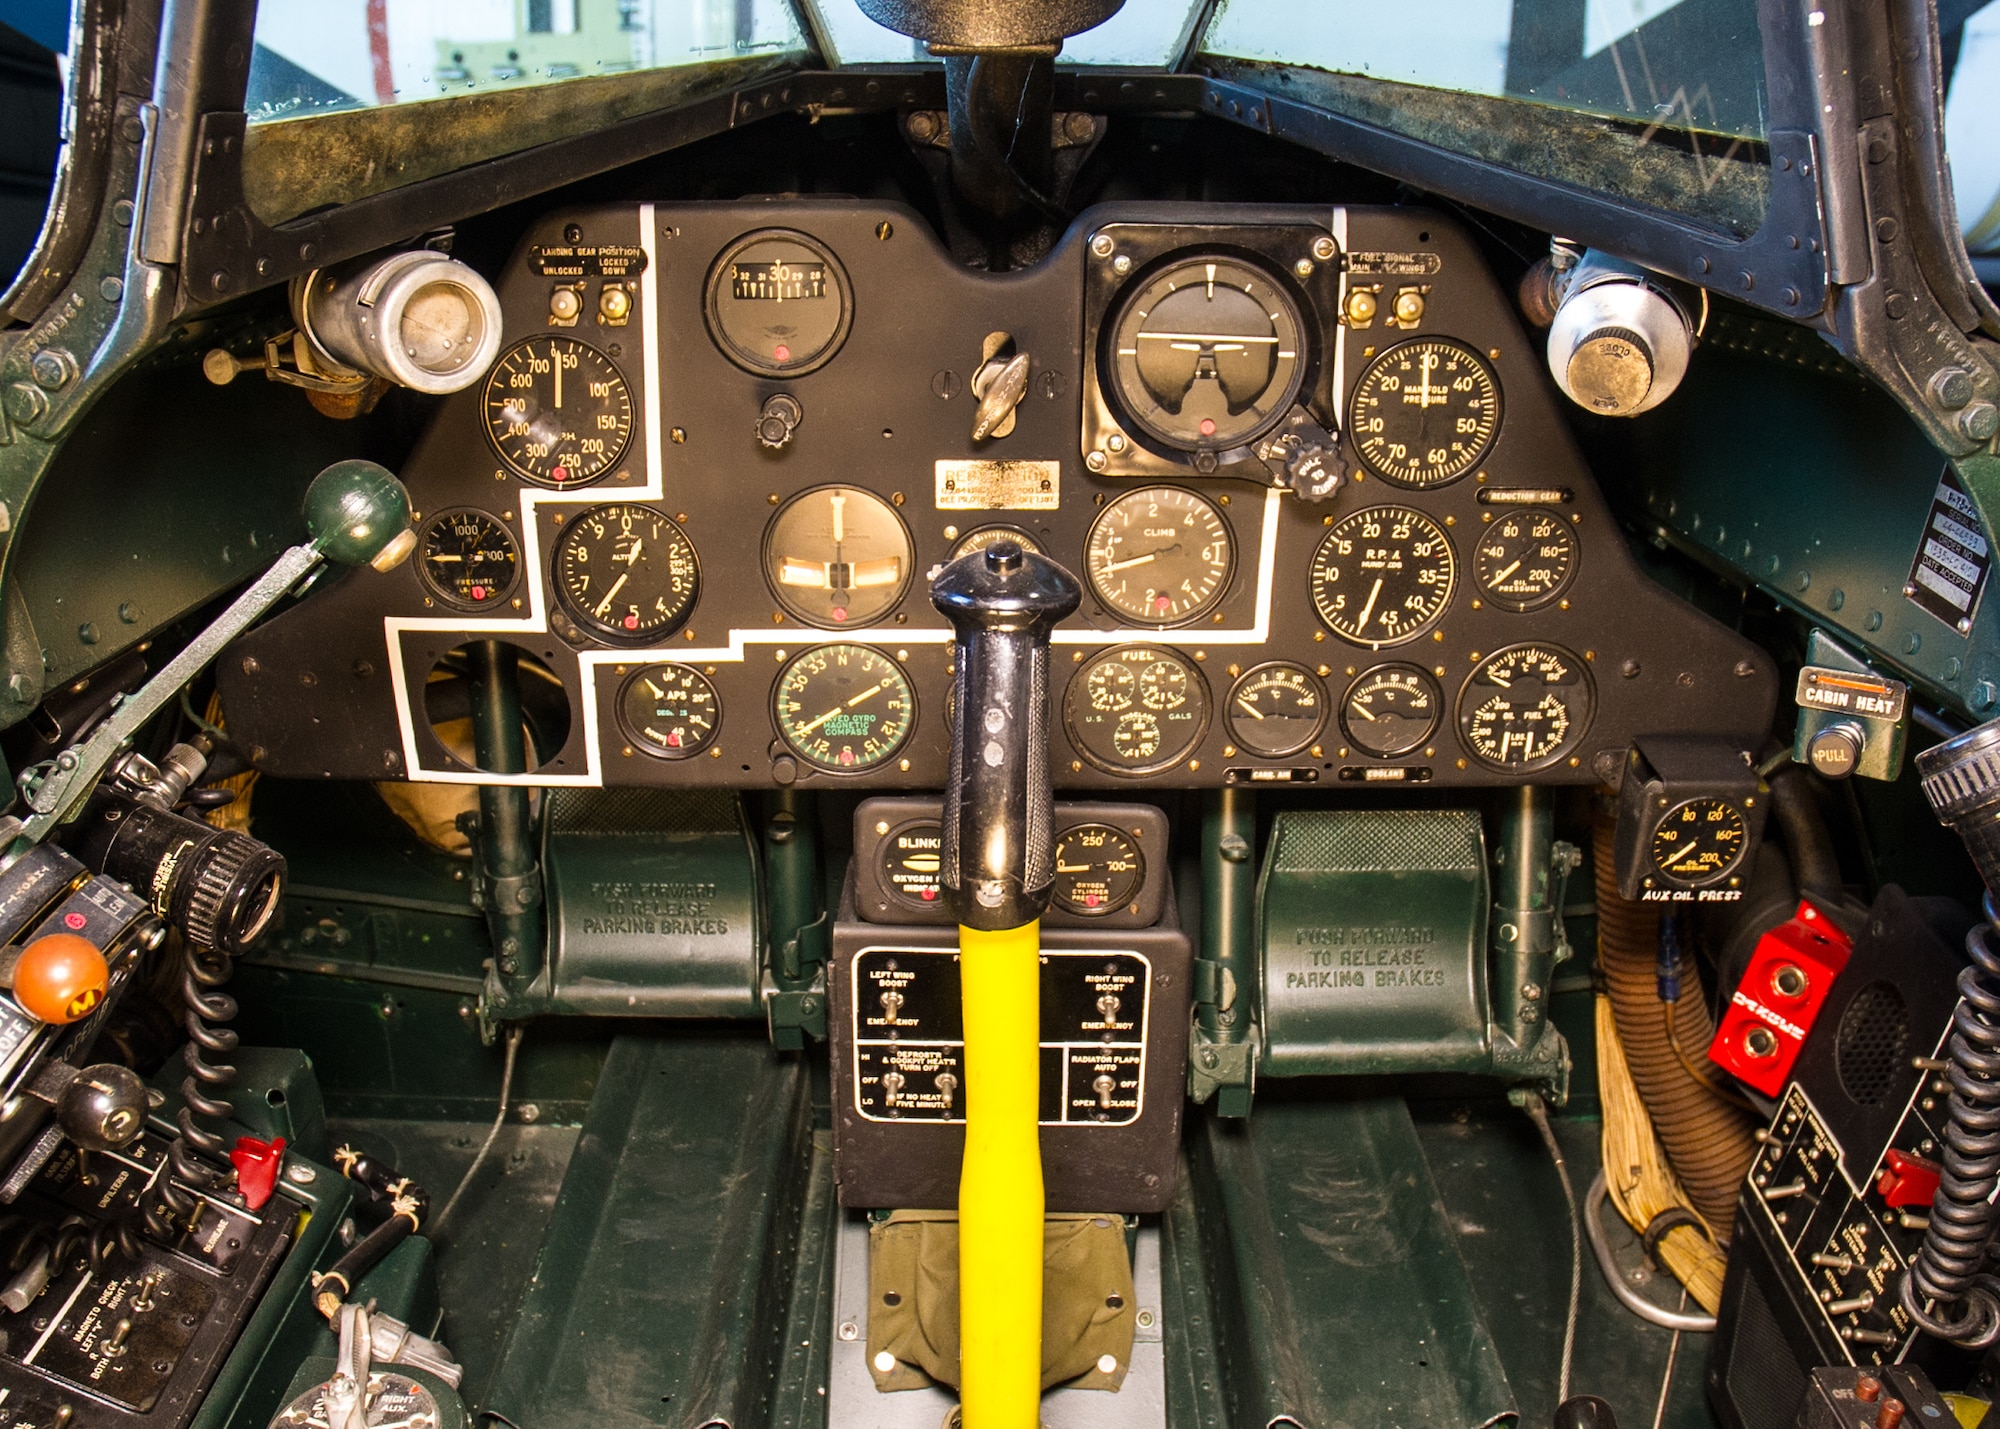 DAYTON, Ohio -- Fisher P-75A Eagle cockpit view in the Research & Development Gallery at the National Museum of the United States Air Force. (U.S. Air Force photo by Ken LaRock)
